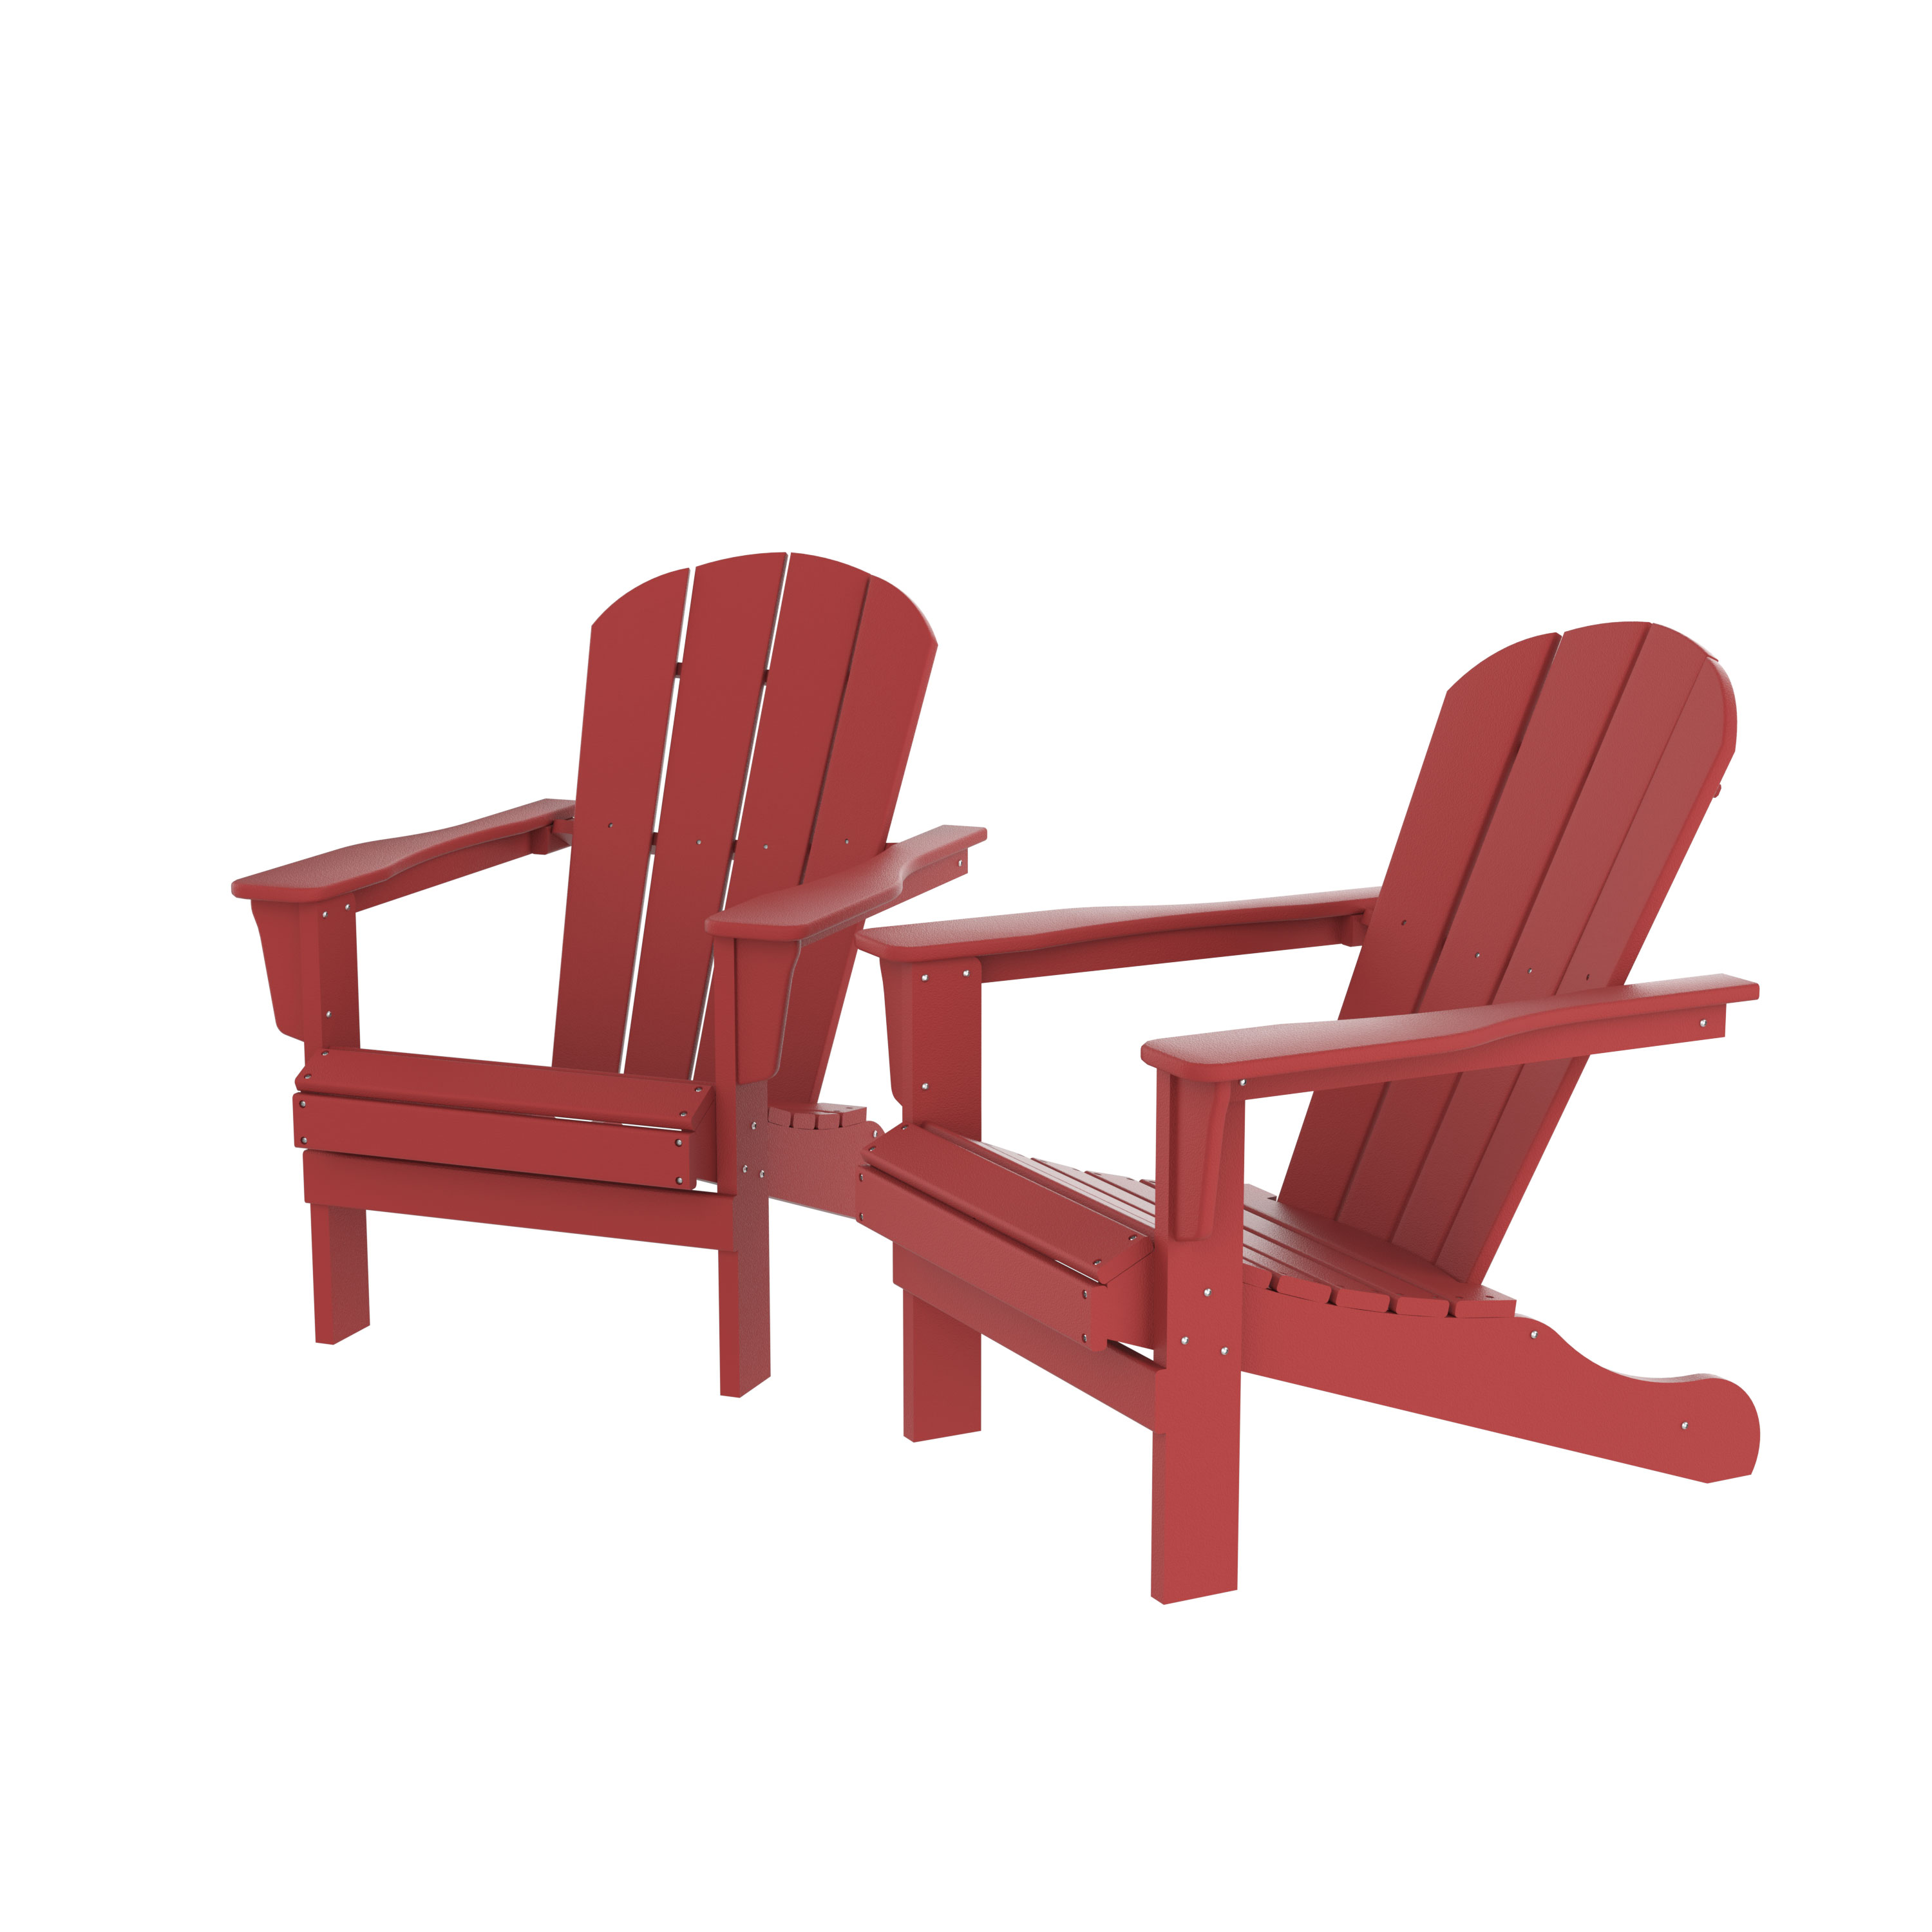 Sportaza HDPE Chair, Fire Pit Chairs, Sand Chair, Patio Outdoor Chairs,DPE Plastic Resin Deck Chair, lawn chairs, Adult Size ,Weather Resistant for Patio/ Backyard/Garden, Red, Set of 2 - image 3 of 6